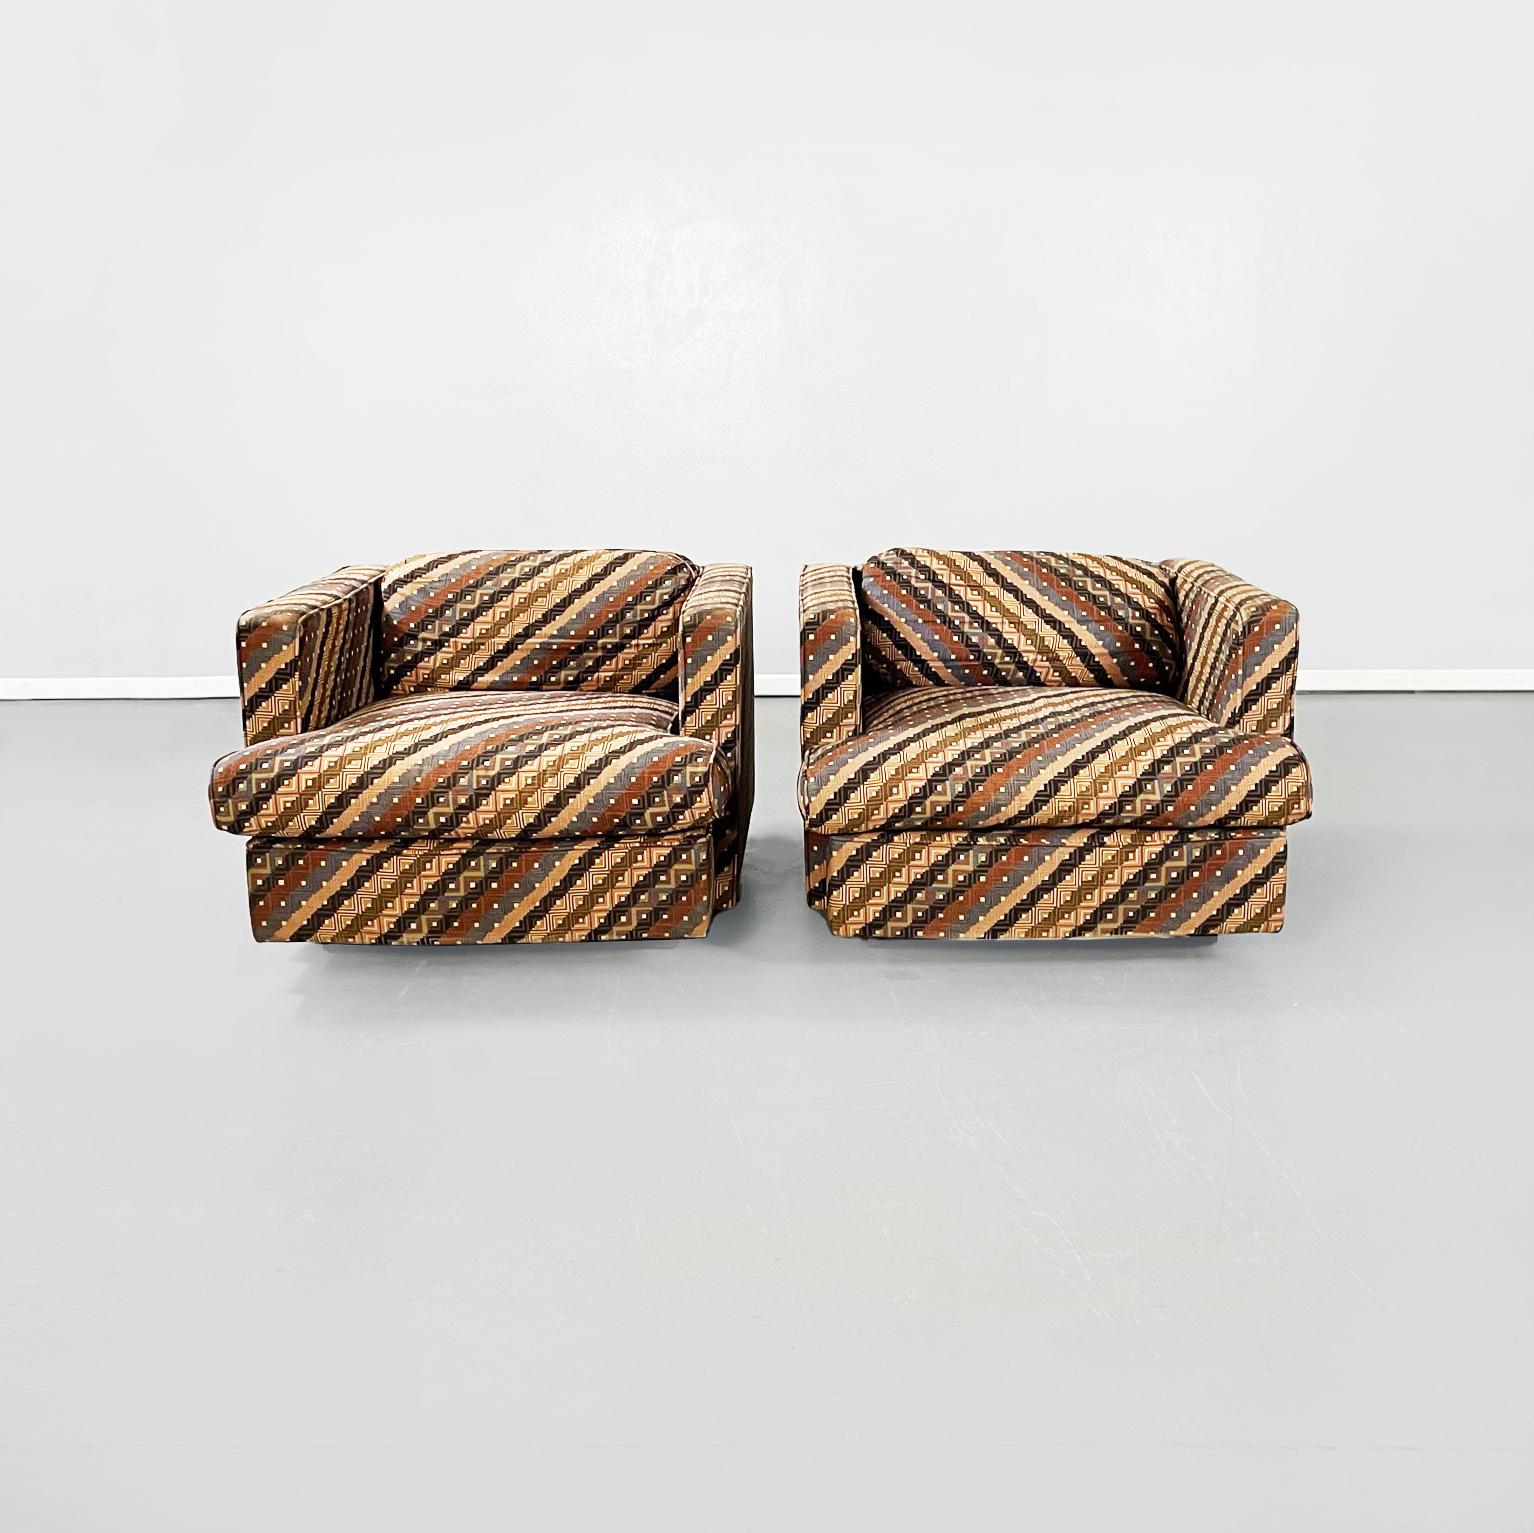 Italian mid-century armchairs with Missoni fabric by Saporiti Italia, 1980s
Pair of armchairs are upholstered and covered in Missoni's fabric with colorful stripe and square patterns. The two armchairs have a square seat that widens on the edge, a